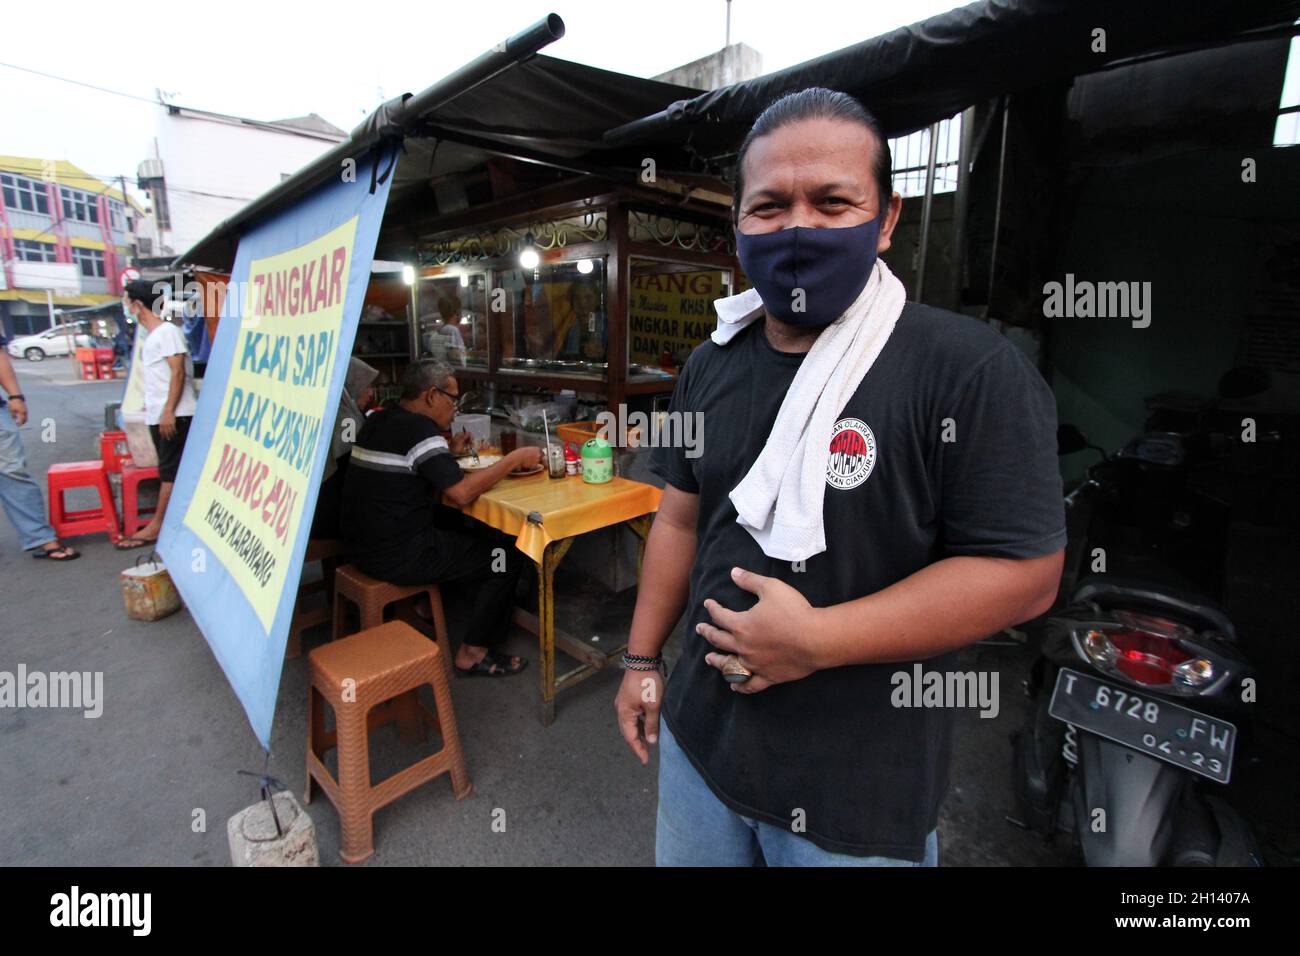 Karawang, Indonesia. 15th Oct, 2021. Yayan, 37, he is one of the sons of the owner of Warung Soto Tangkar Mang Endi who has been selling since the 1970s, poses for a photo at the legendary food stall Soto Tangkar typical of Karawang on Jalan Dewi Sartika, West Karawang, Karawang, West Java, Indonesia. This soto dish uses beef ribs and beef leg veins seasoned with turmeric and chili. It tastes savory and slightly sweet. Interestingly, this delicious dish is cooked traditionally. Almost all ingredients are steamed in a pot over coals of firewood. The growth of micro, small and medium enterprises Stock Photo